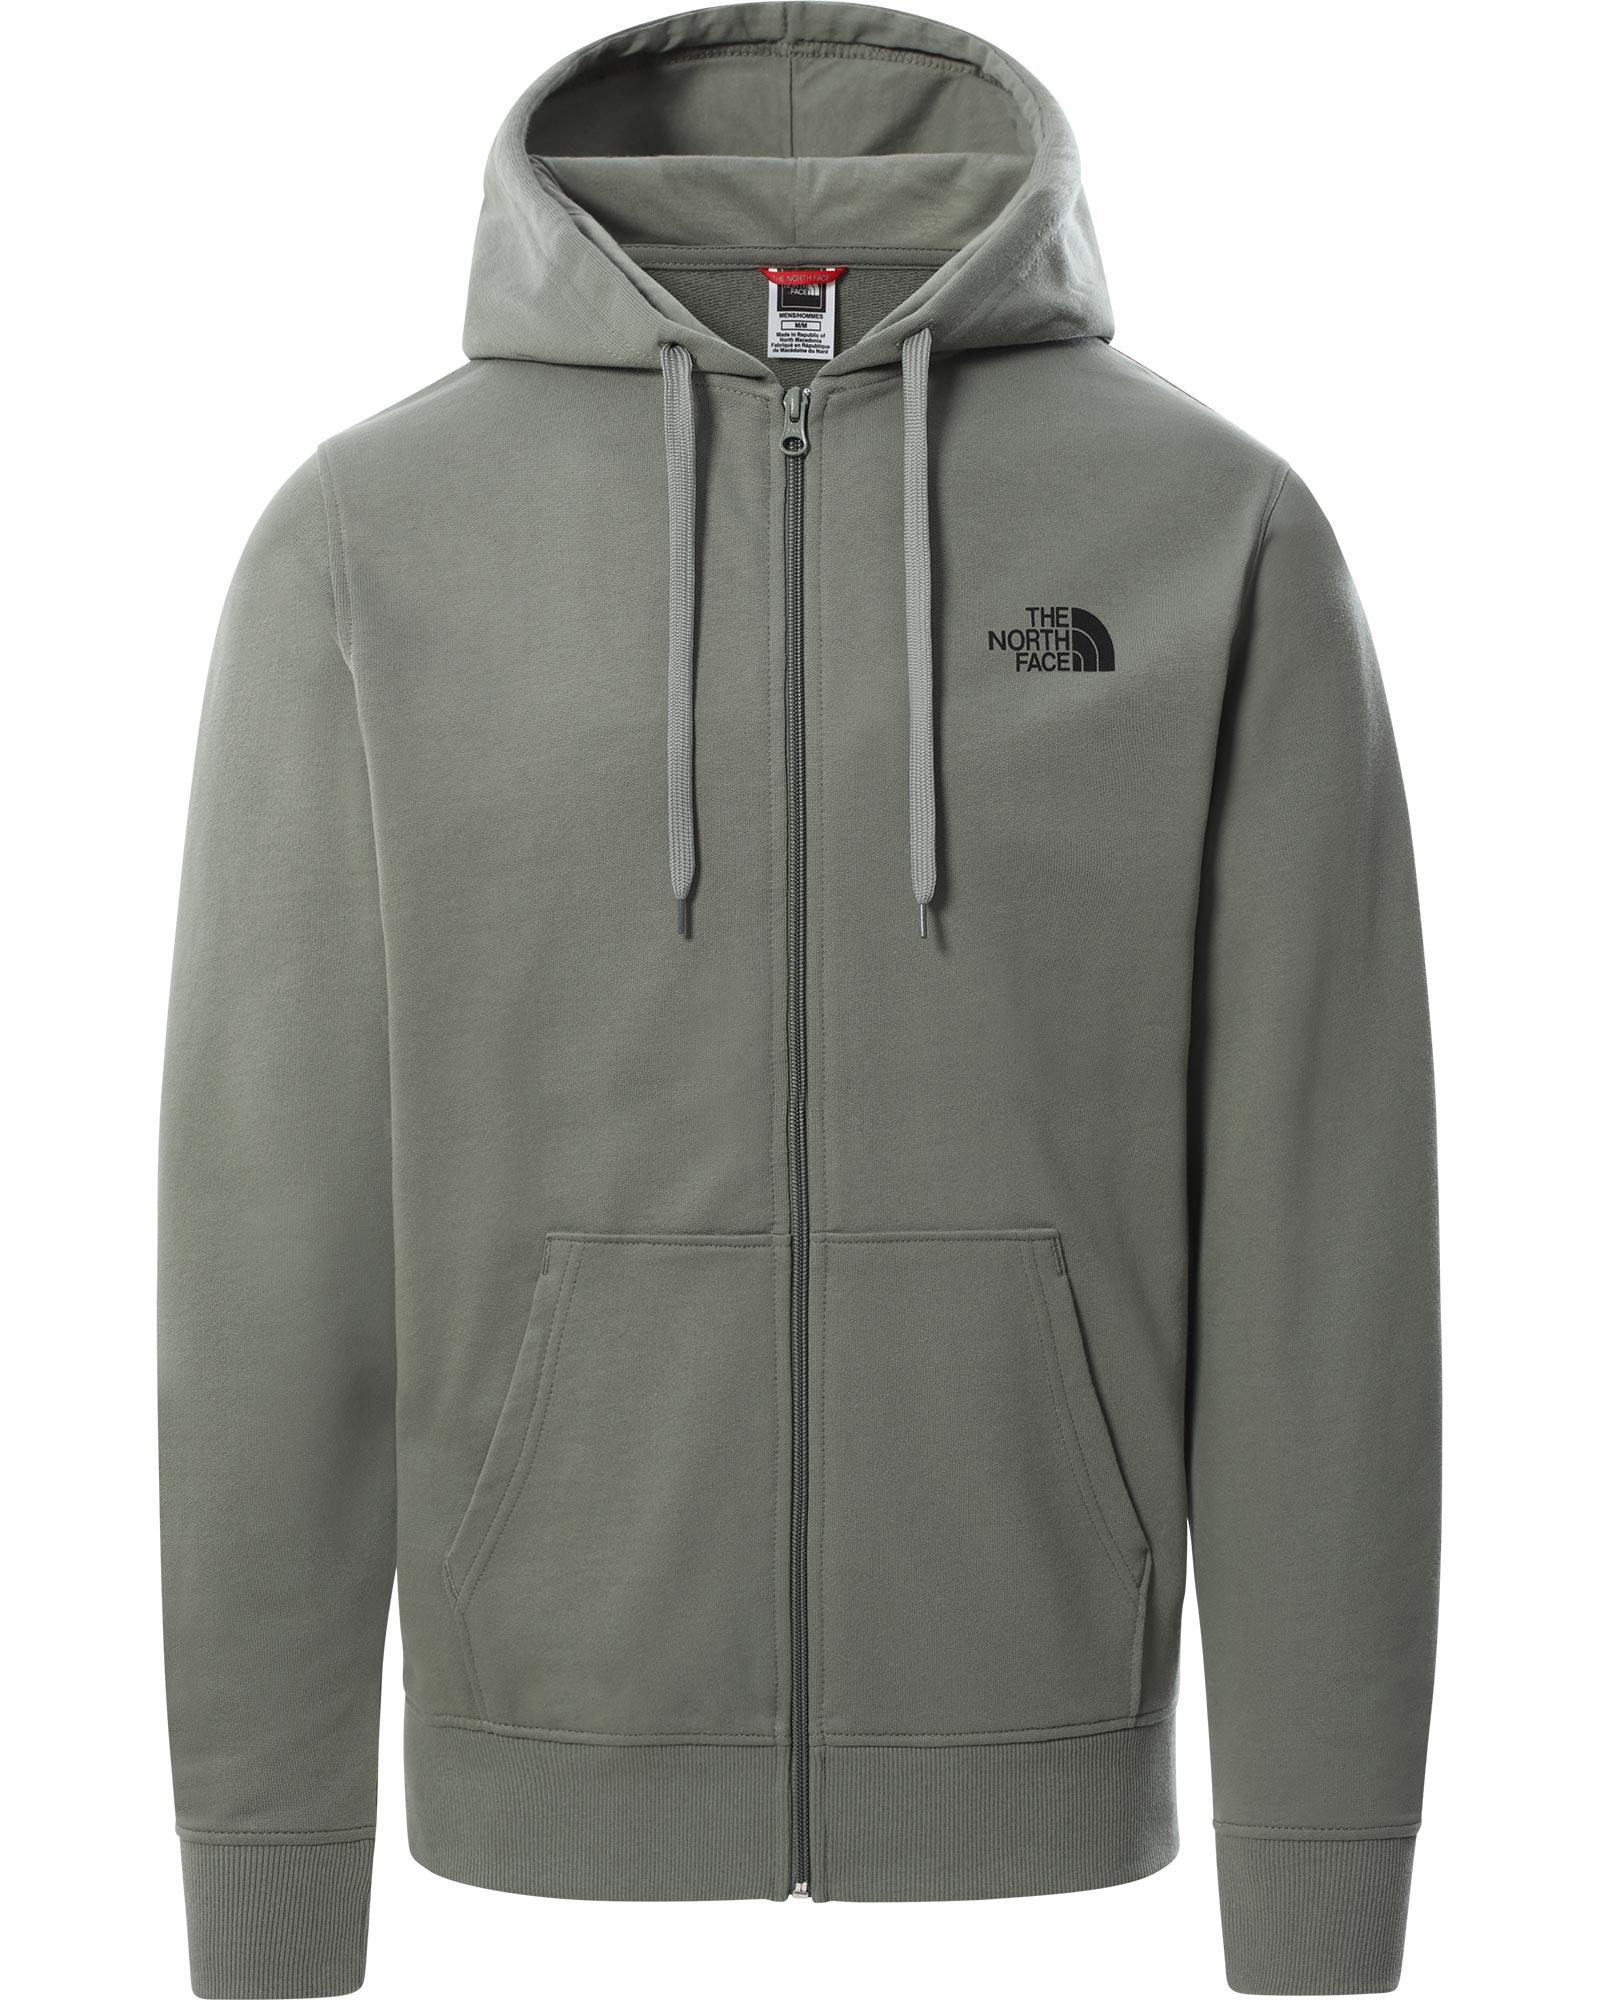 The North Face Open Gate Men’s Full Zip Hoodie - Agave Green S